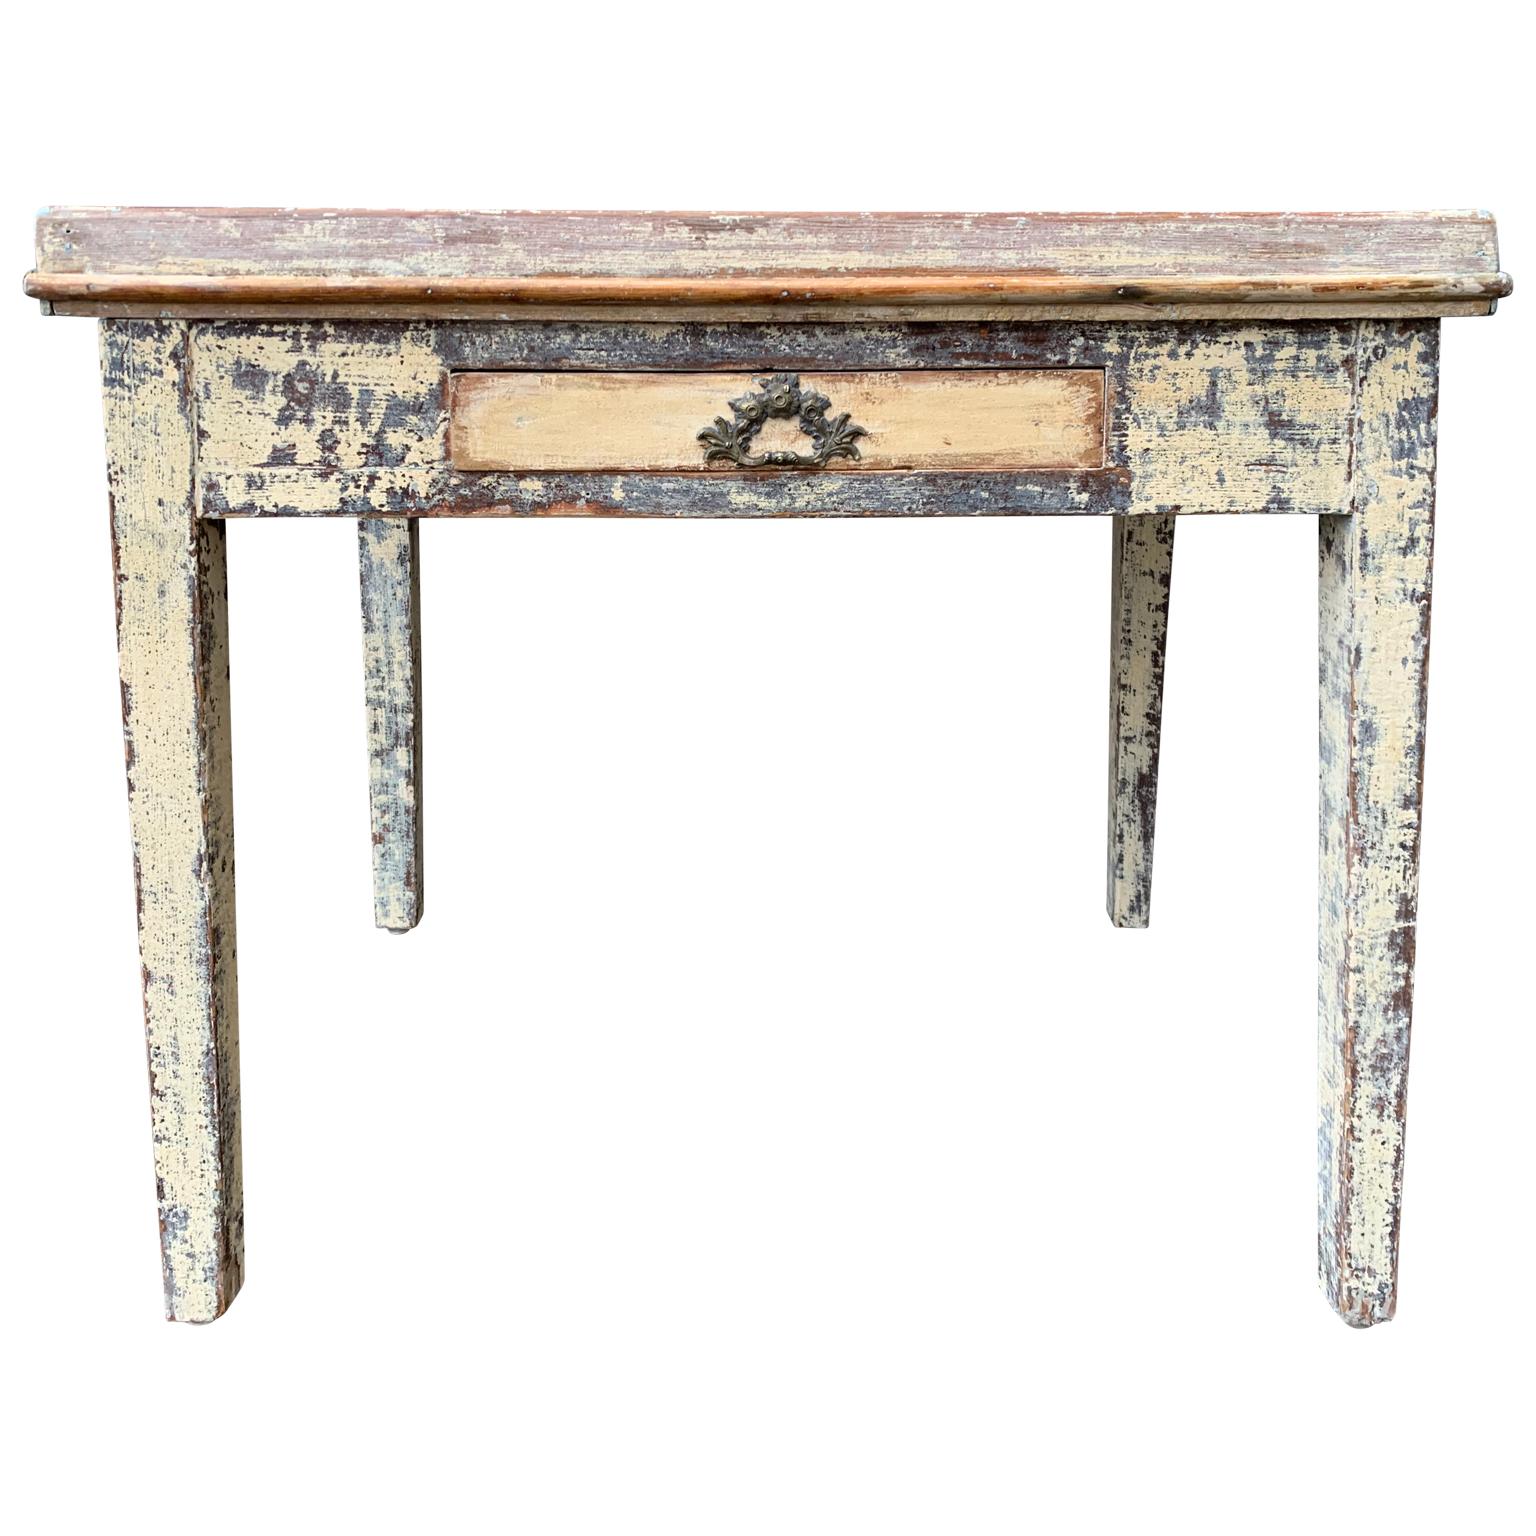 Hand-Crafted 19th Century Swedish Gustavian Painted Delft Tile Table